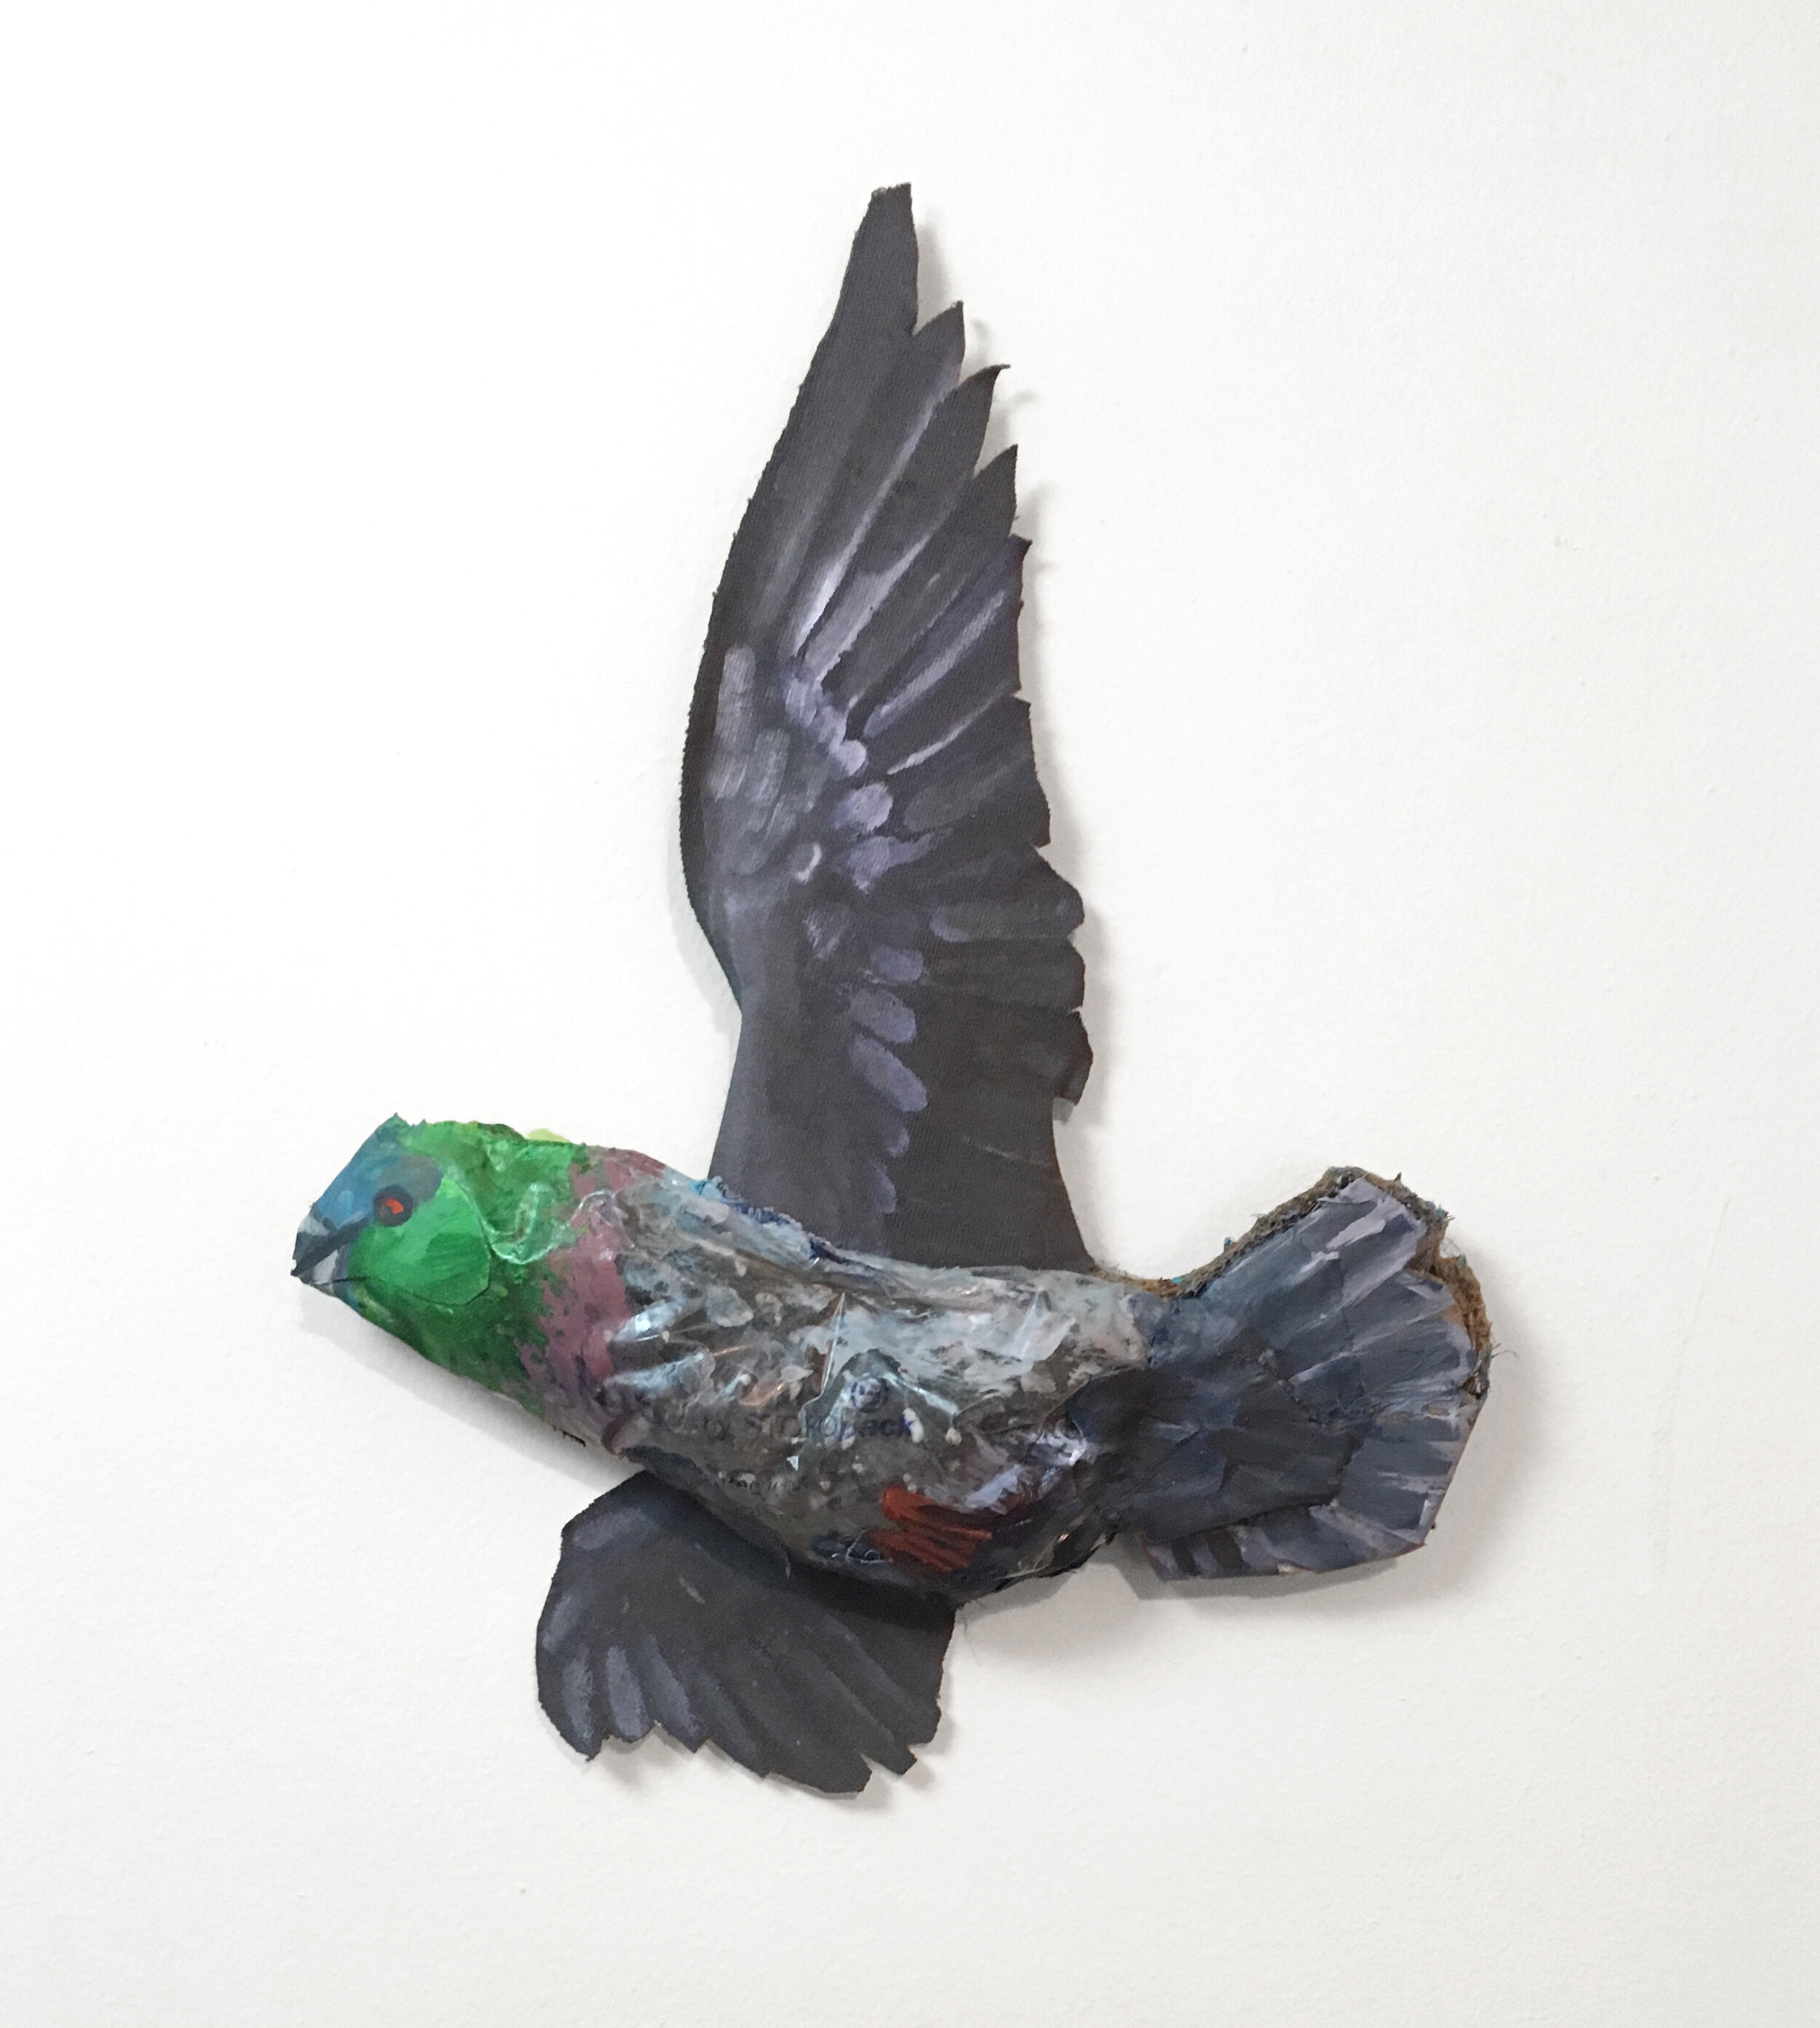  “Untethered Pigeon”, 12h x 9w x 1.5w in, Acrylic on fabric, coconut husk, cardboard, and plastic, stuffed with soil, 2019 